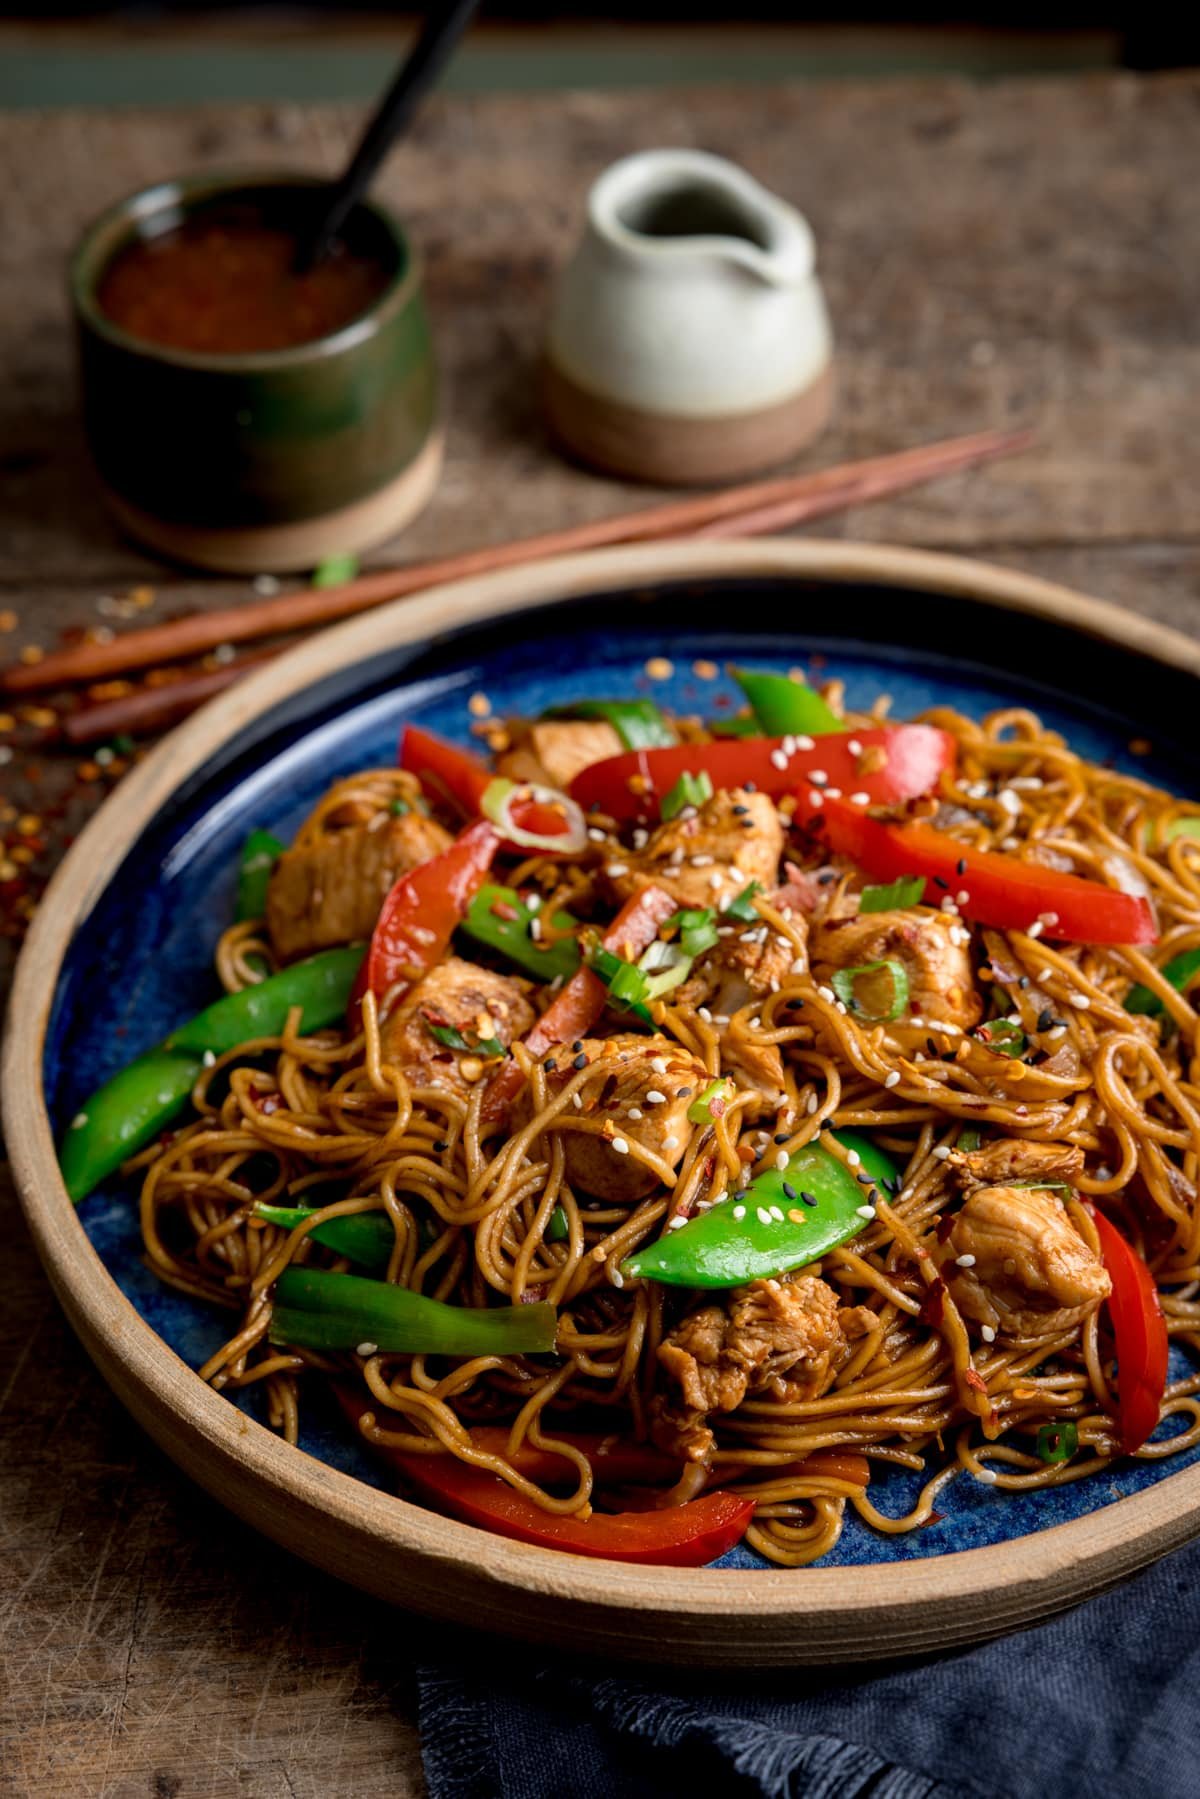 Side image of chicken lo mein on a blue plate on top of a wooden table. There is a pot of sweet chilli sauce, with a spoon sticking out, a little jug of soy sauce and some chopsticks at the top of the image.